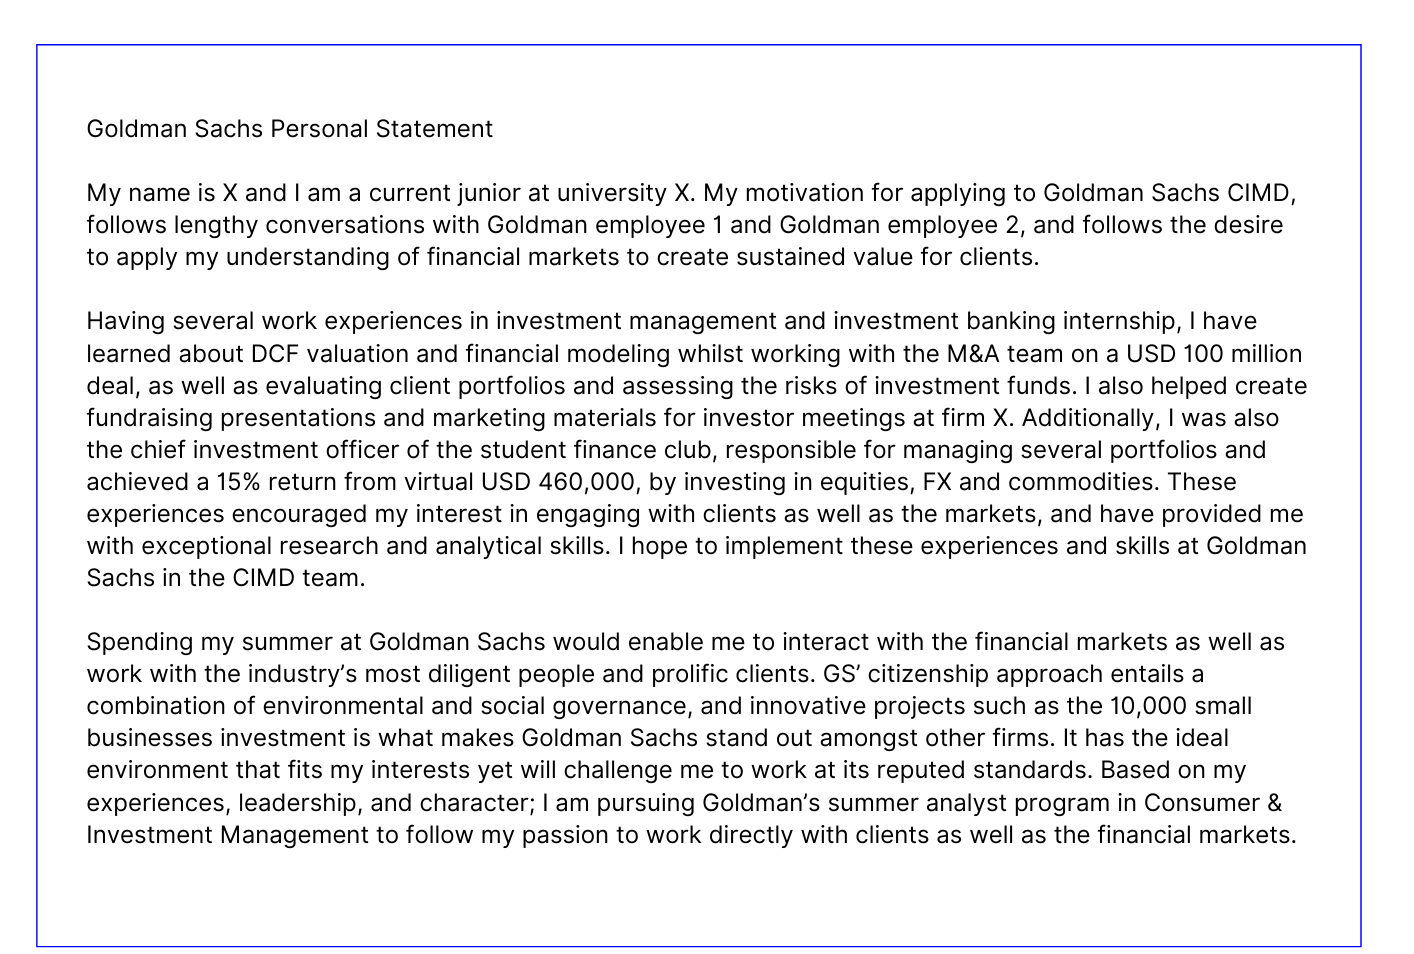 goldman sachs successful cover letter example